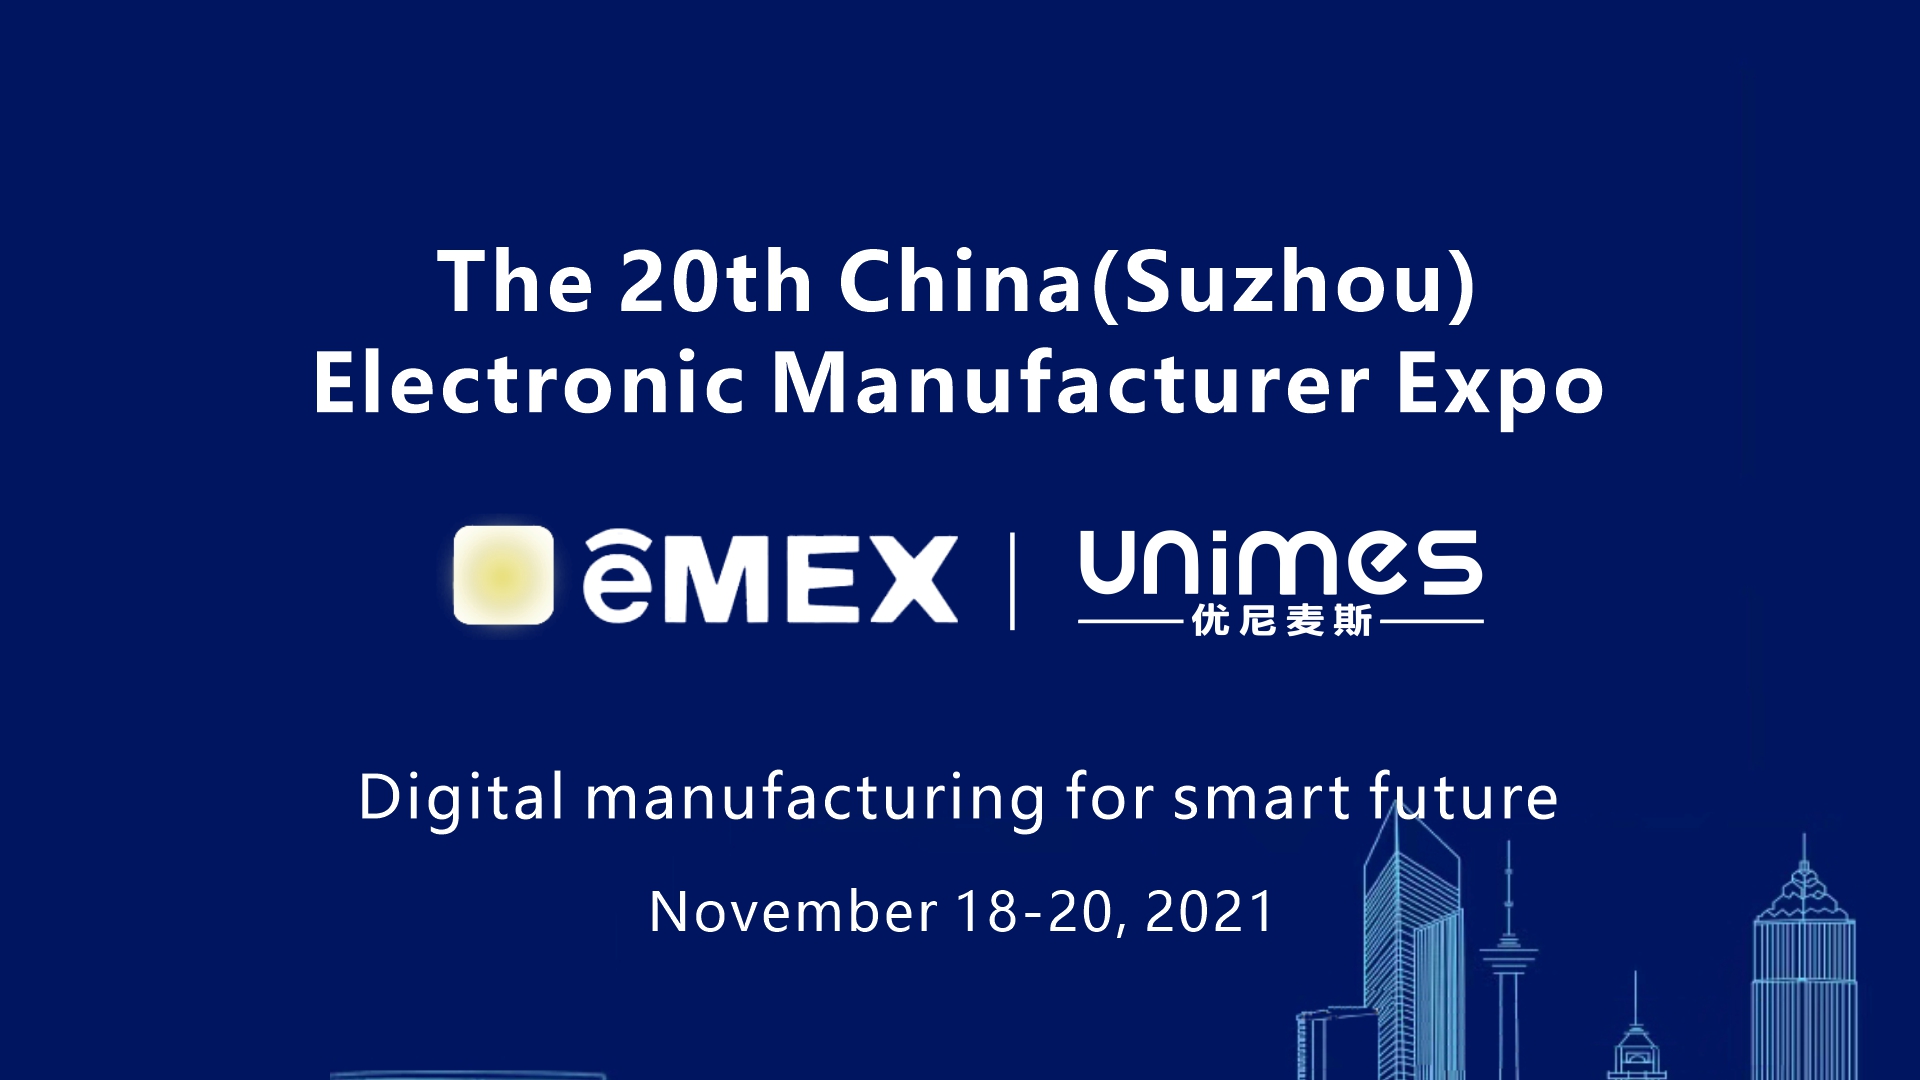 Unimes invited to The 20th China (Suzhou) Electronic Manufacturer Expo.